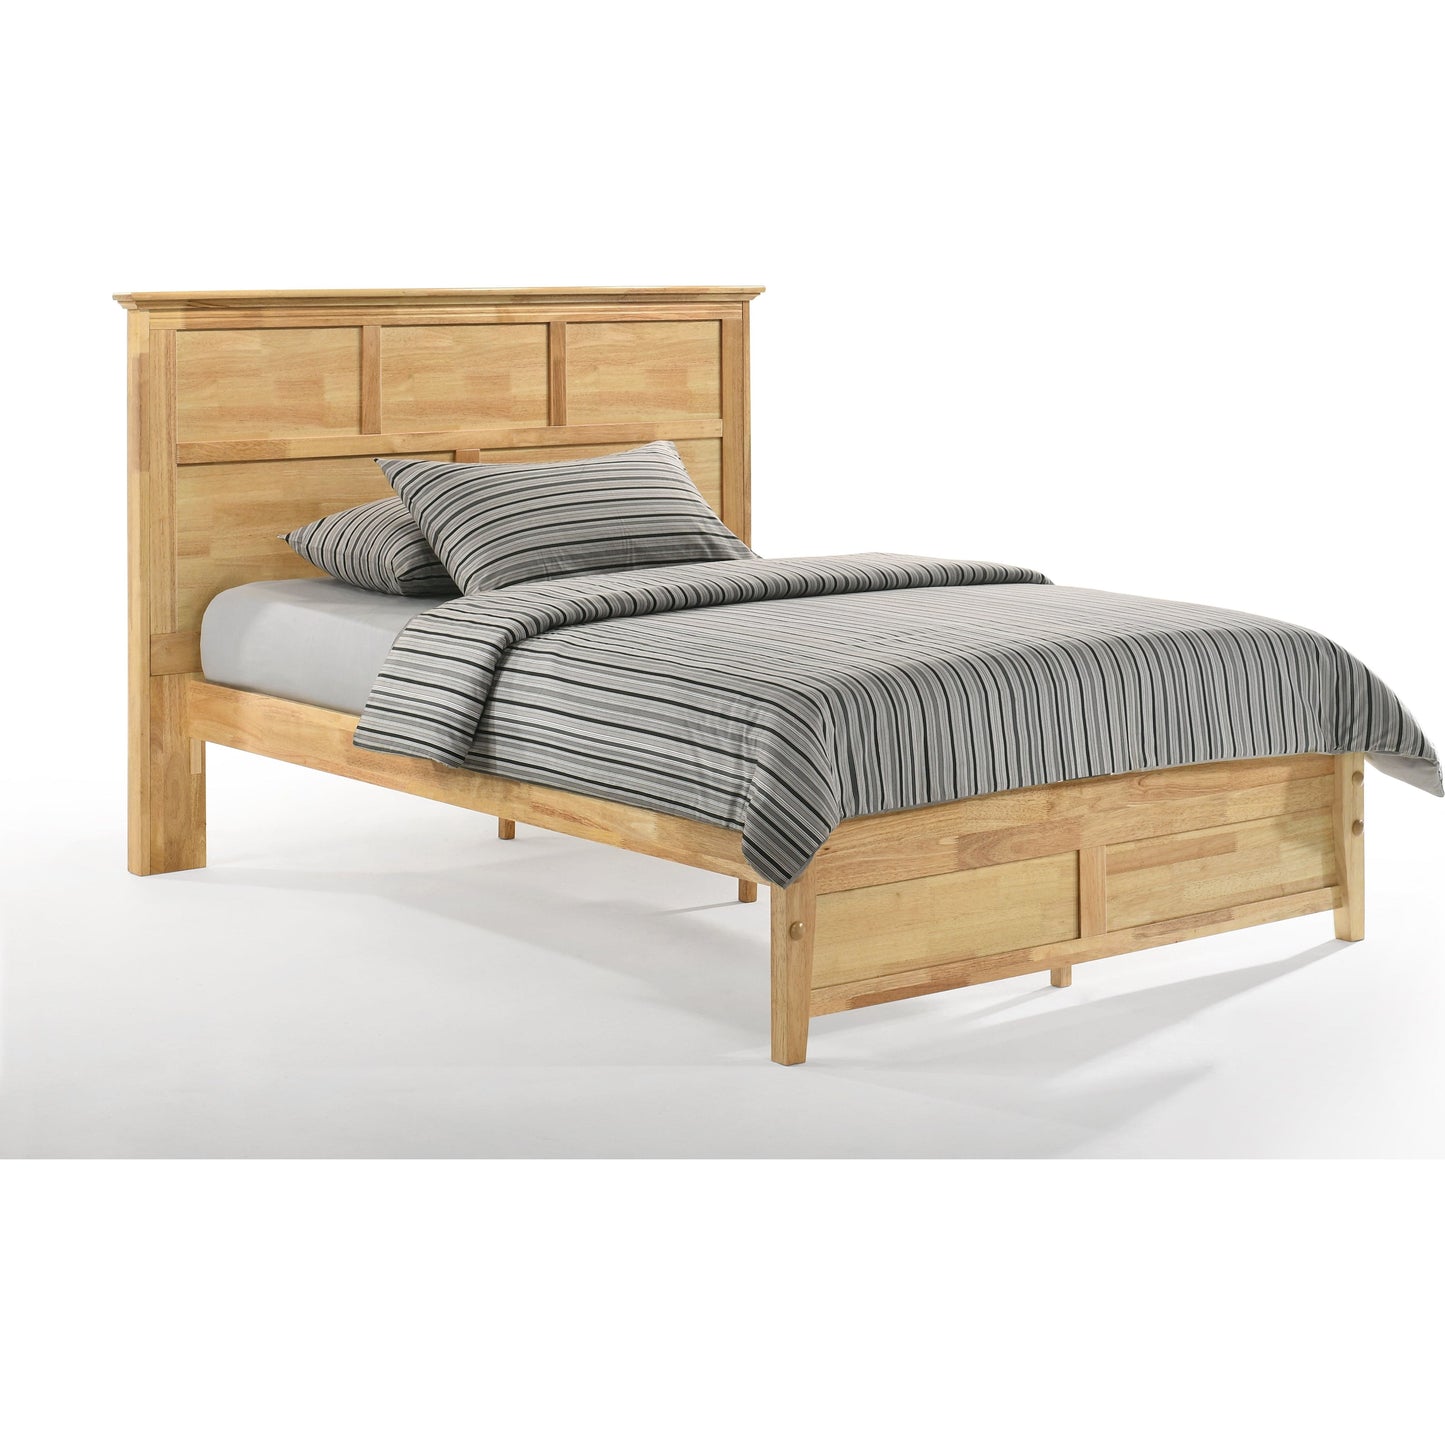 Night And Day King Tarragon Bed Frame (P Series) in cherry finish TAR-PH-EKG-CH-P-COM